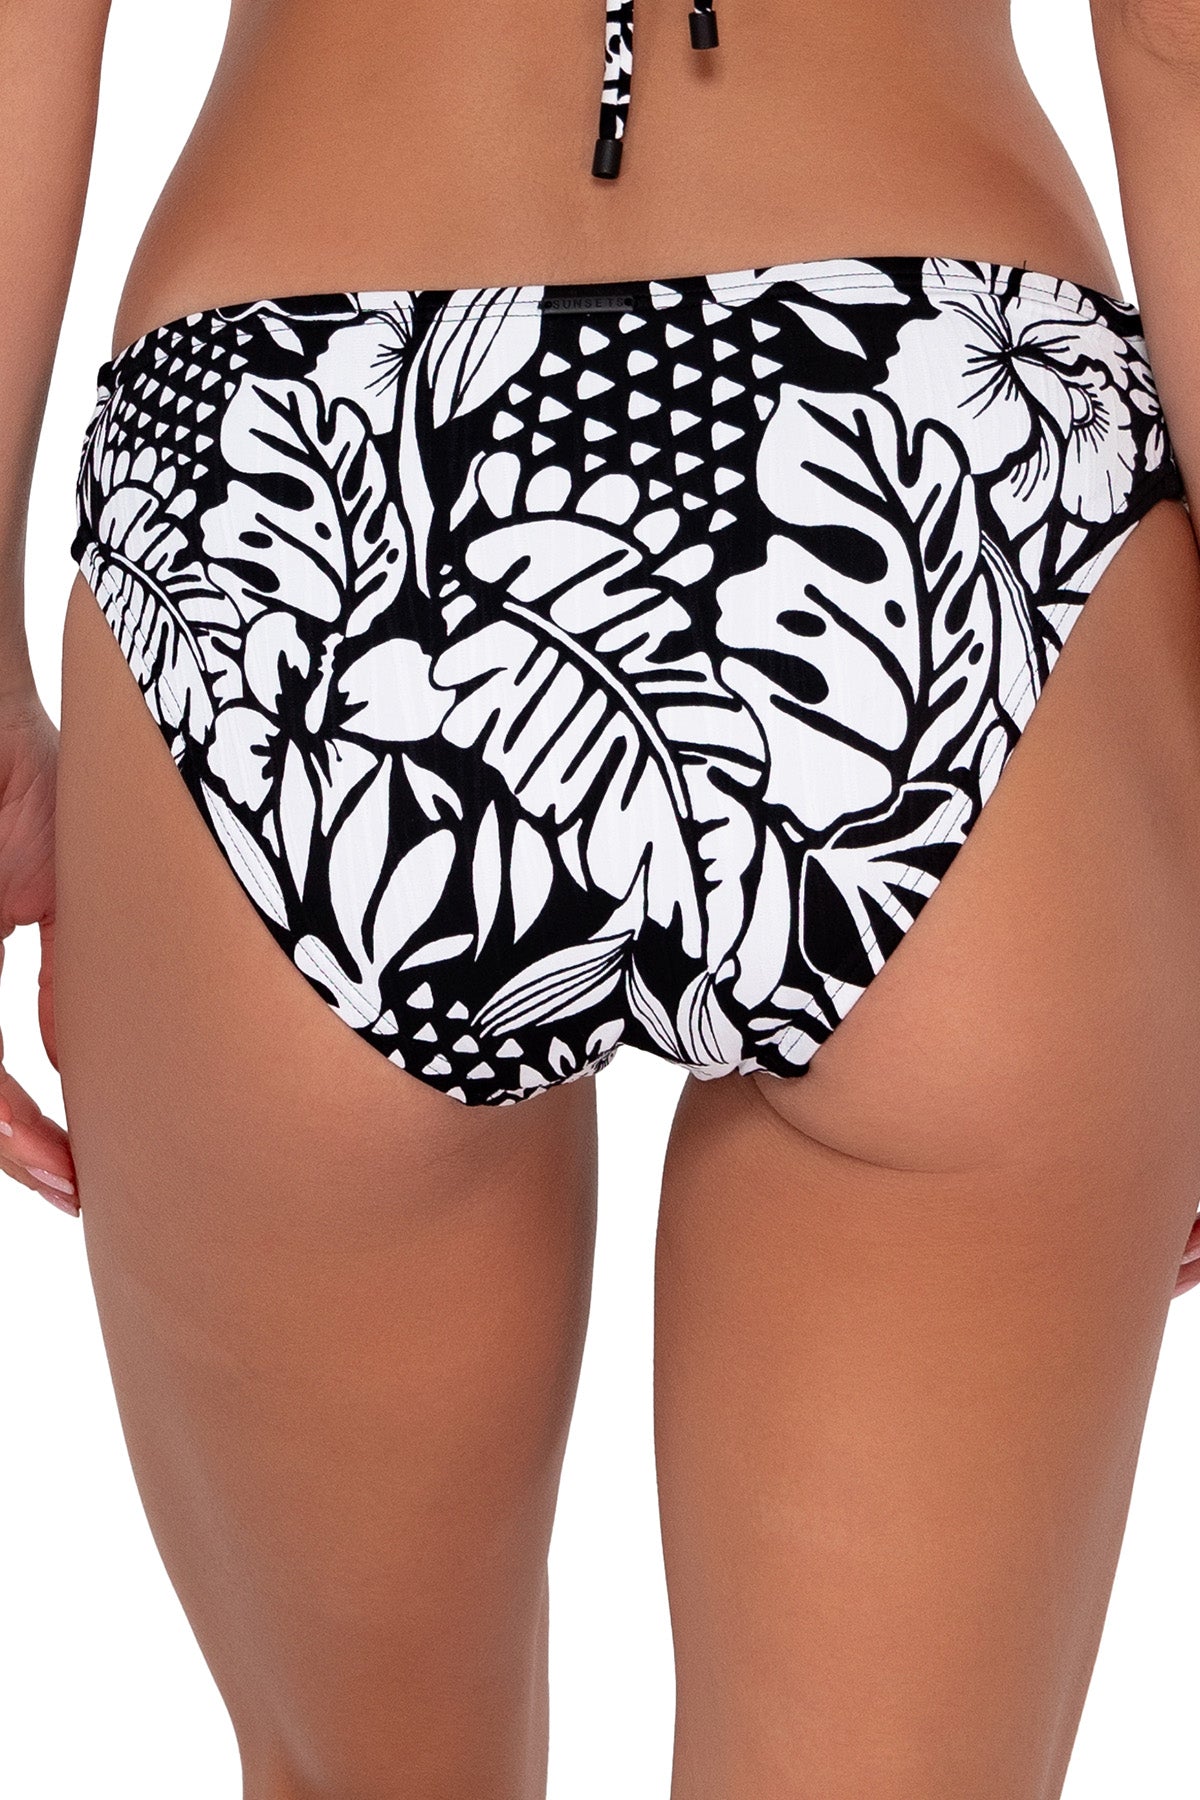 Front pose #1 of Gigi wearing Sunsets Caribbean Seagrass Texture Audra Hipster Bottom